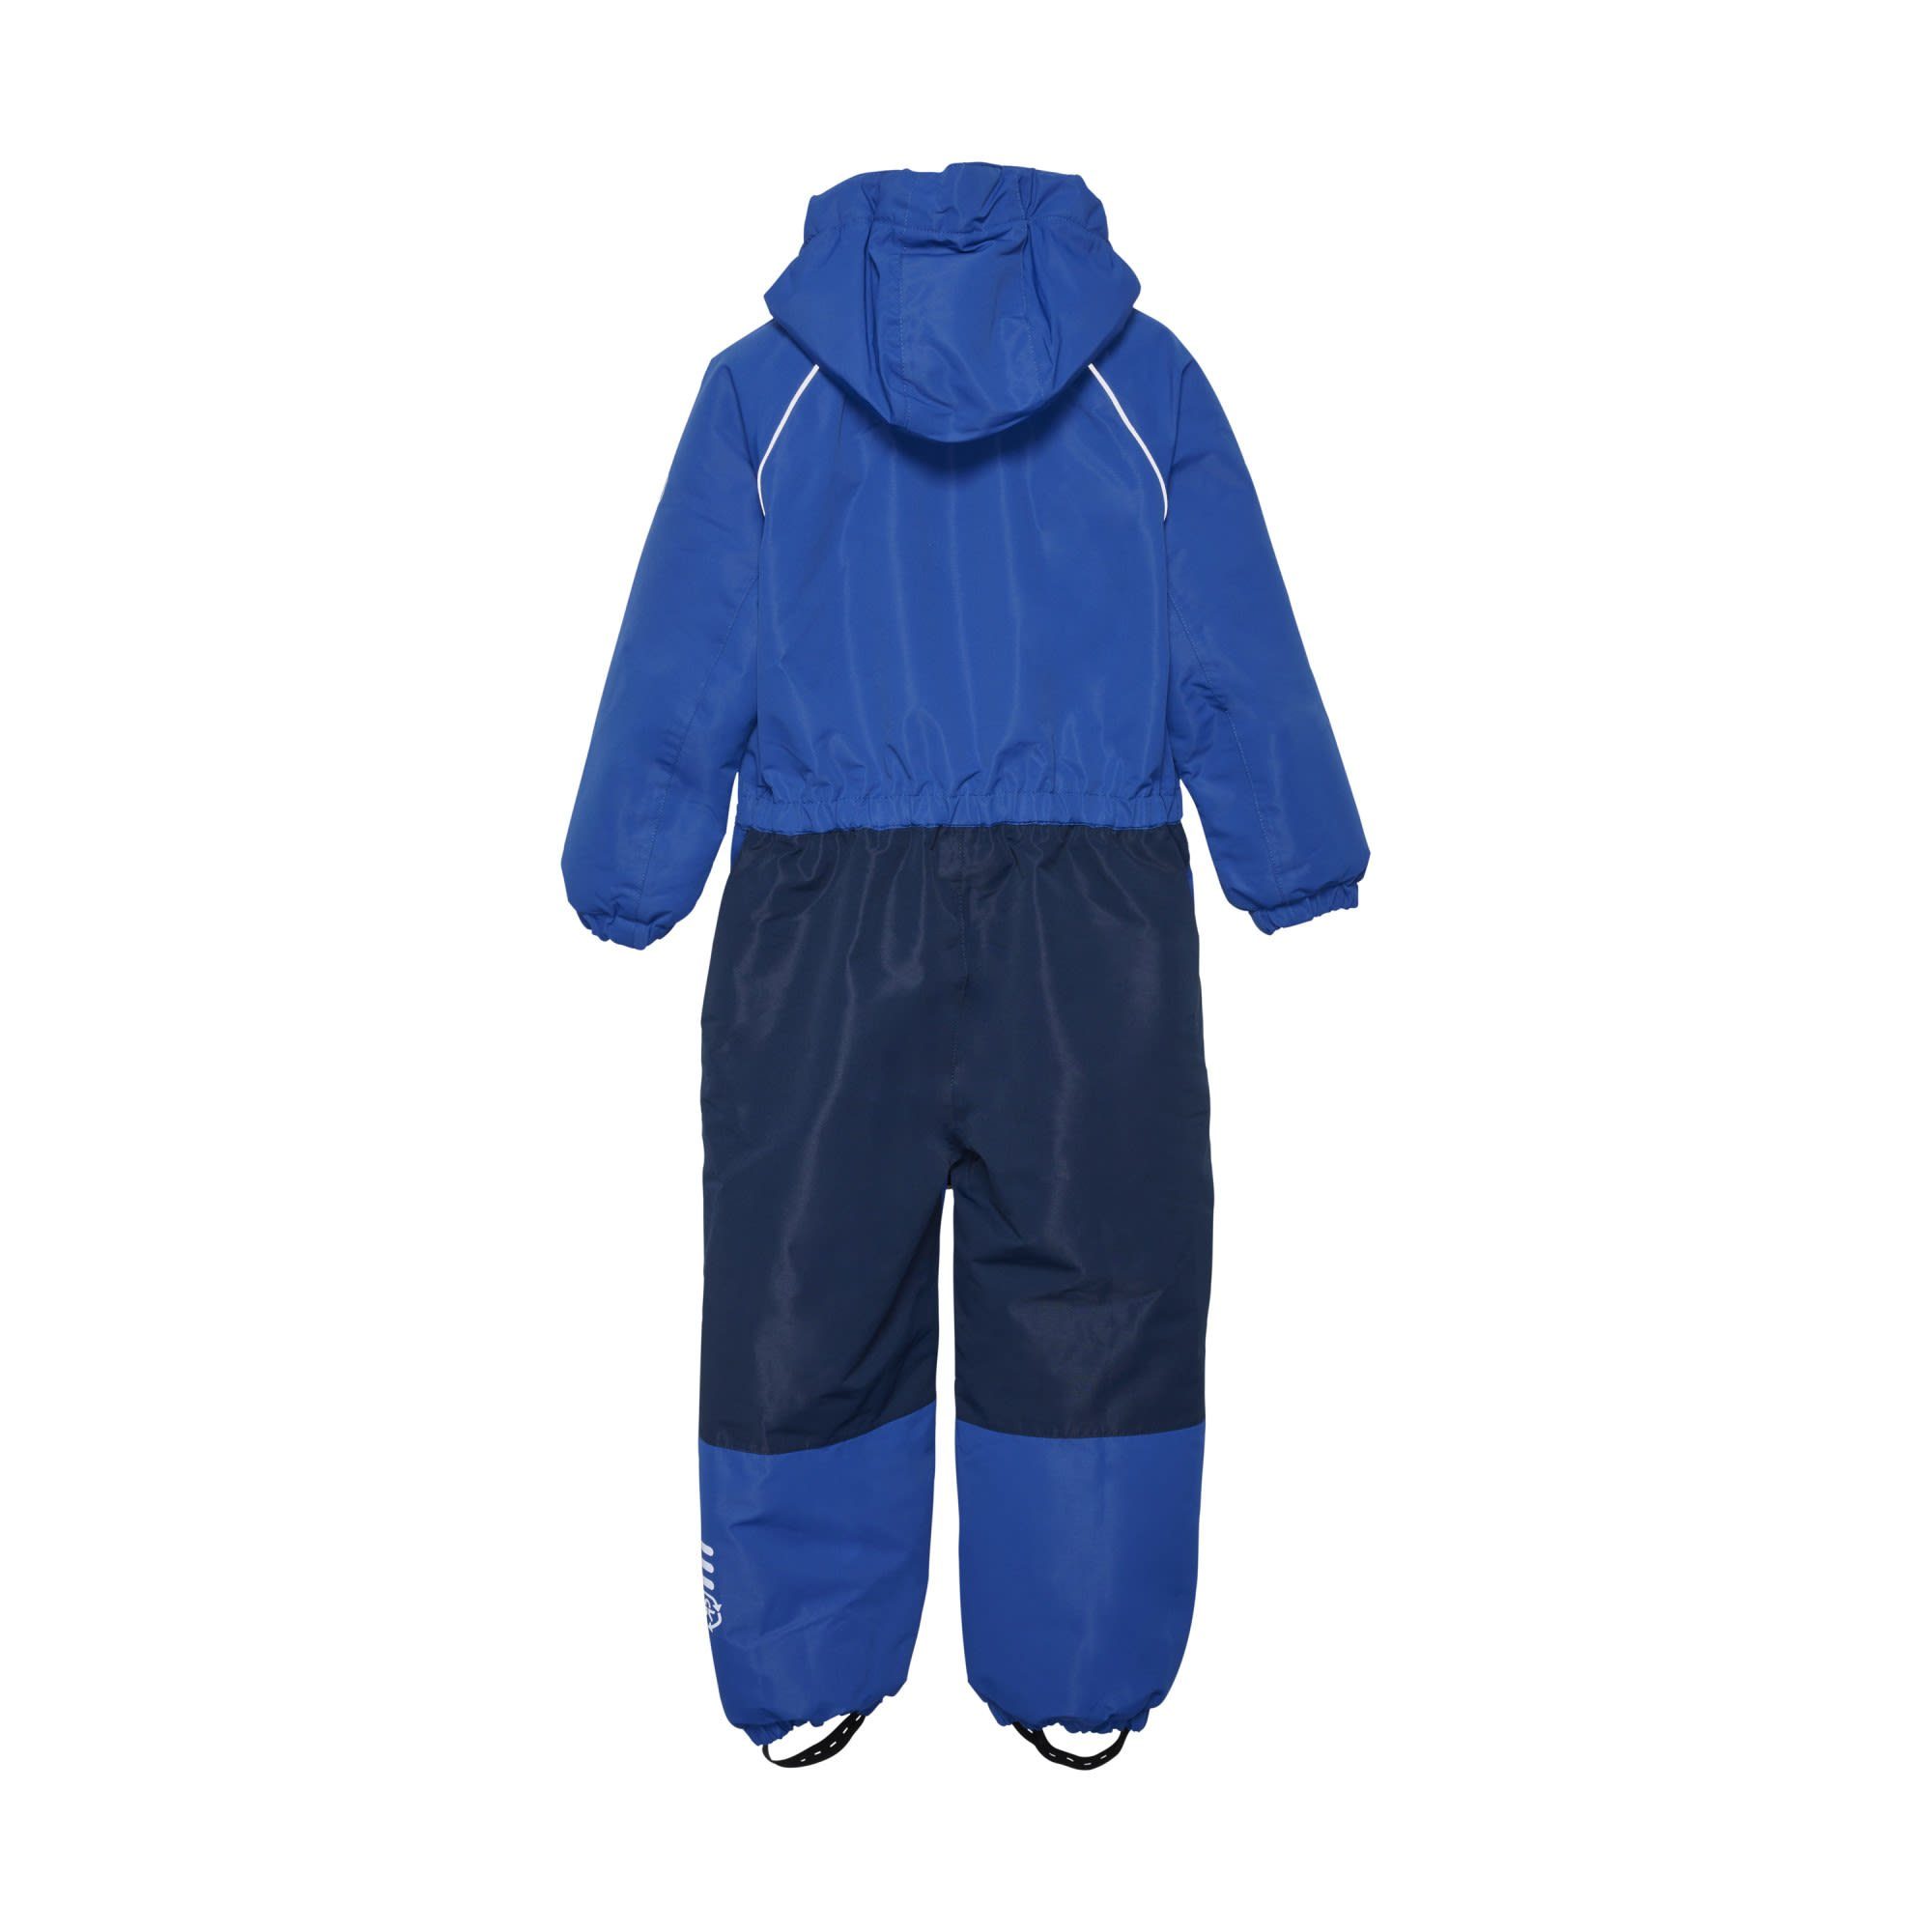 Kinder Kids Limoges Color Contrast Kids KIDS Overall Coverall With COLOR